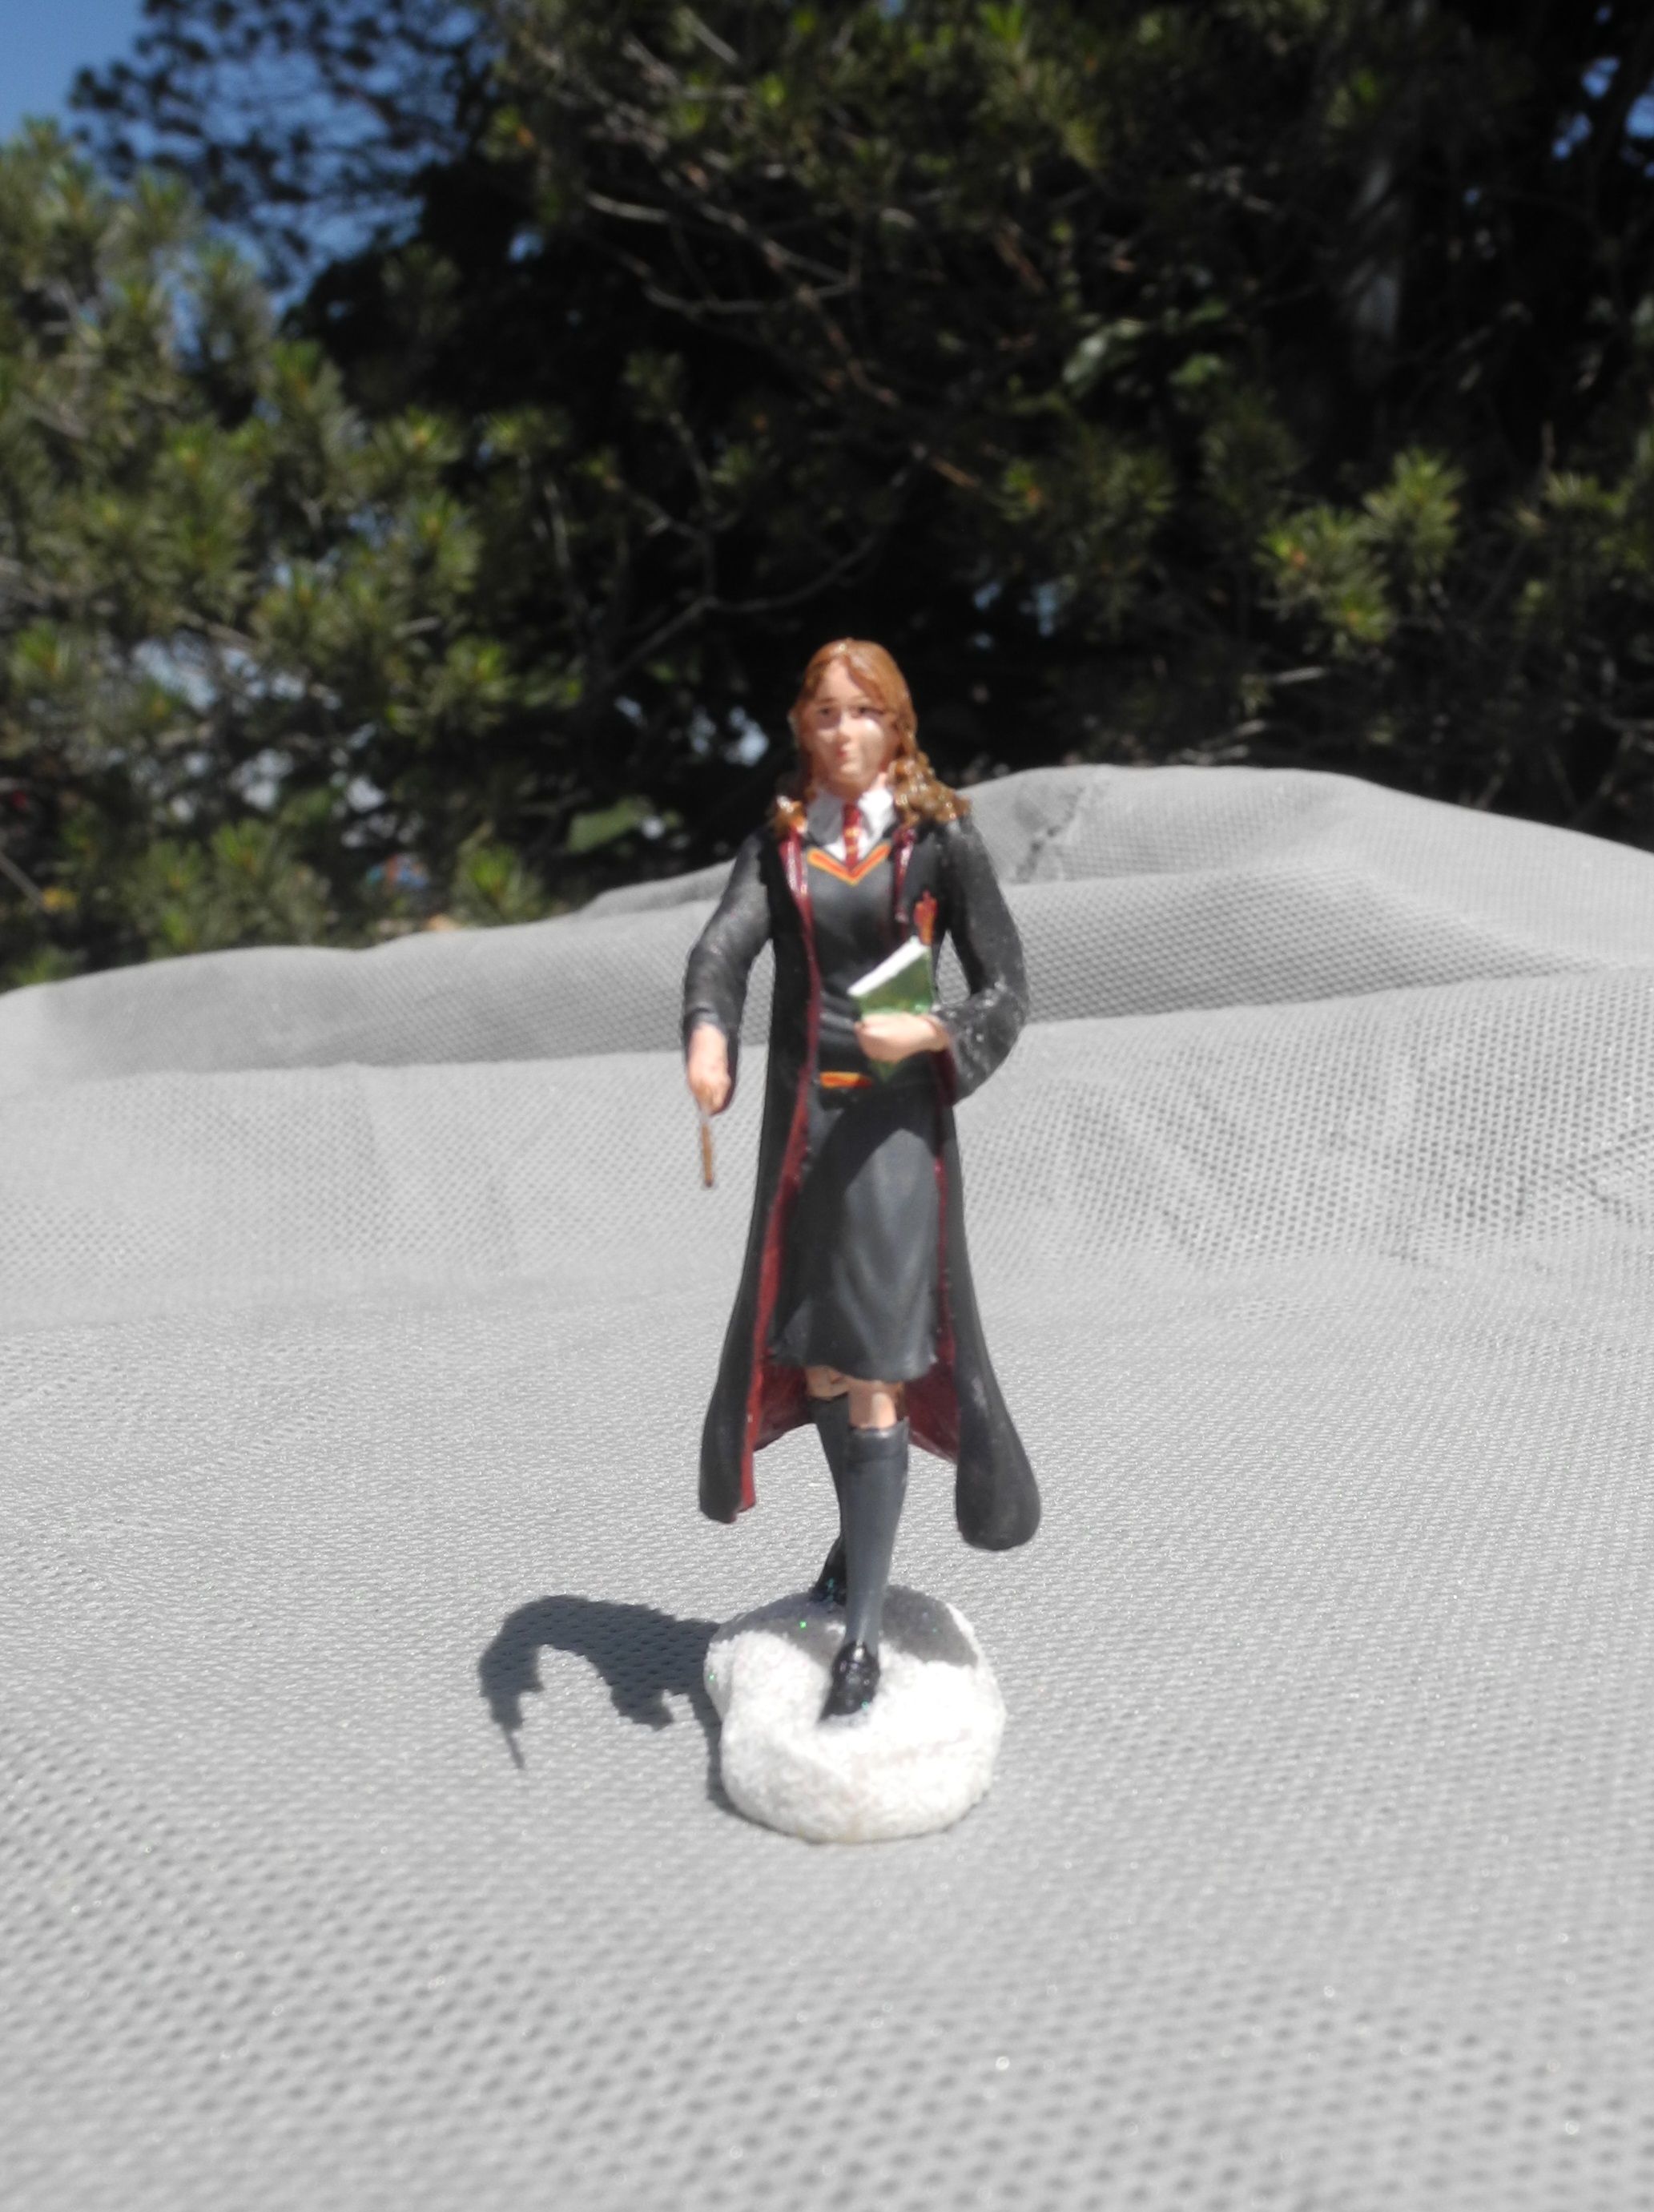 The Bradford Exchange’s “HOGWARTS TRAIN STATION™” free “HERMIONE GRANGER™” figurine is prepared for any situation with her customary book in one hand and her wand in the other.